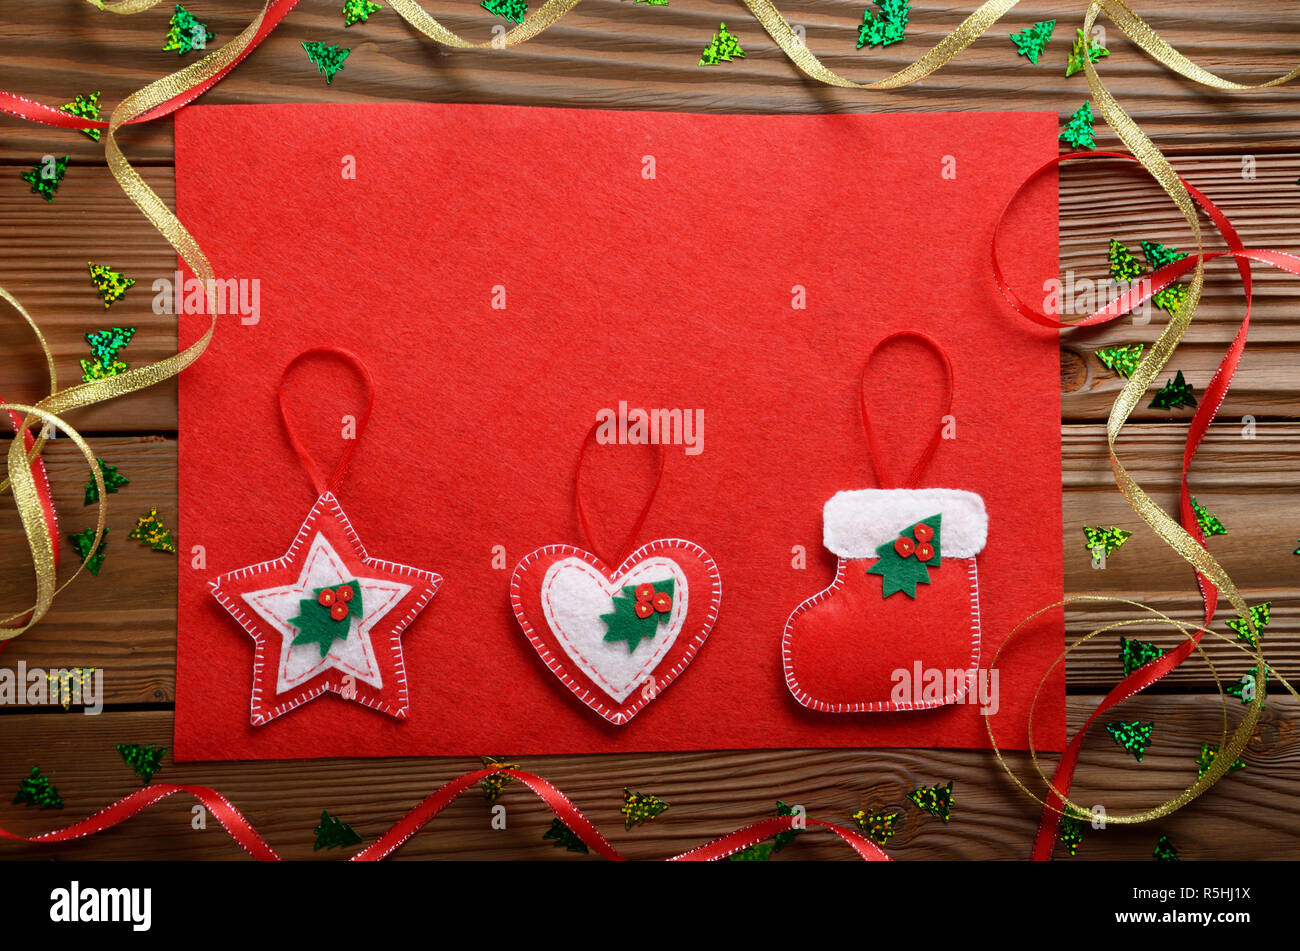 Handmade Rustic Christmas Tree Decorations With Red Felt On Wooden 